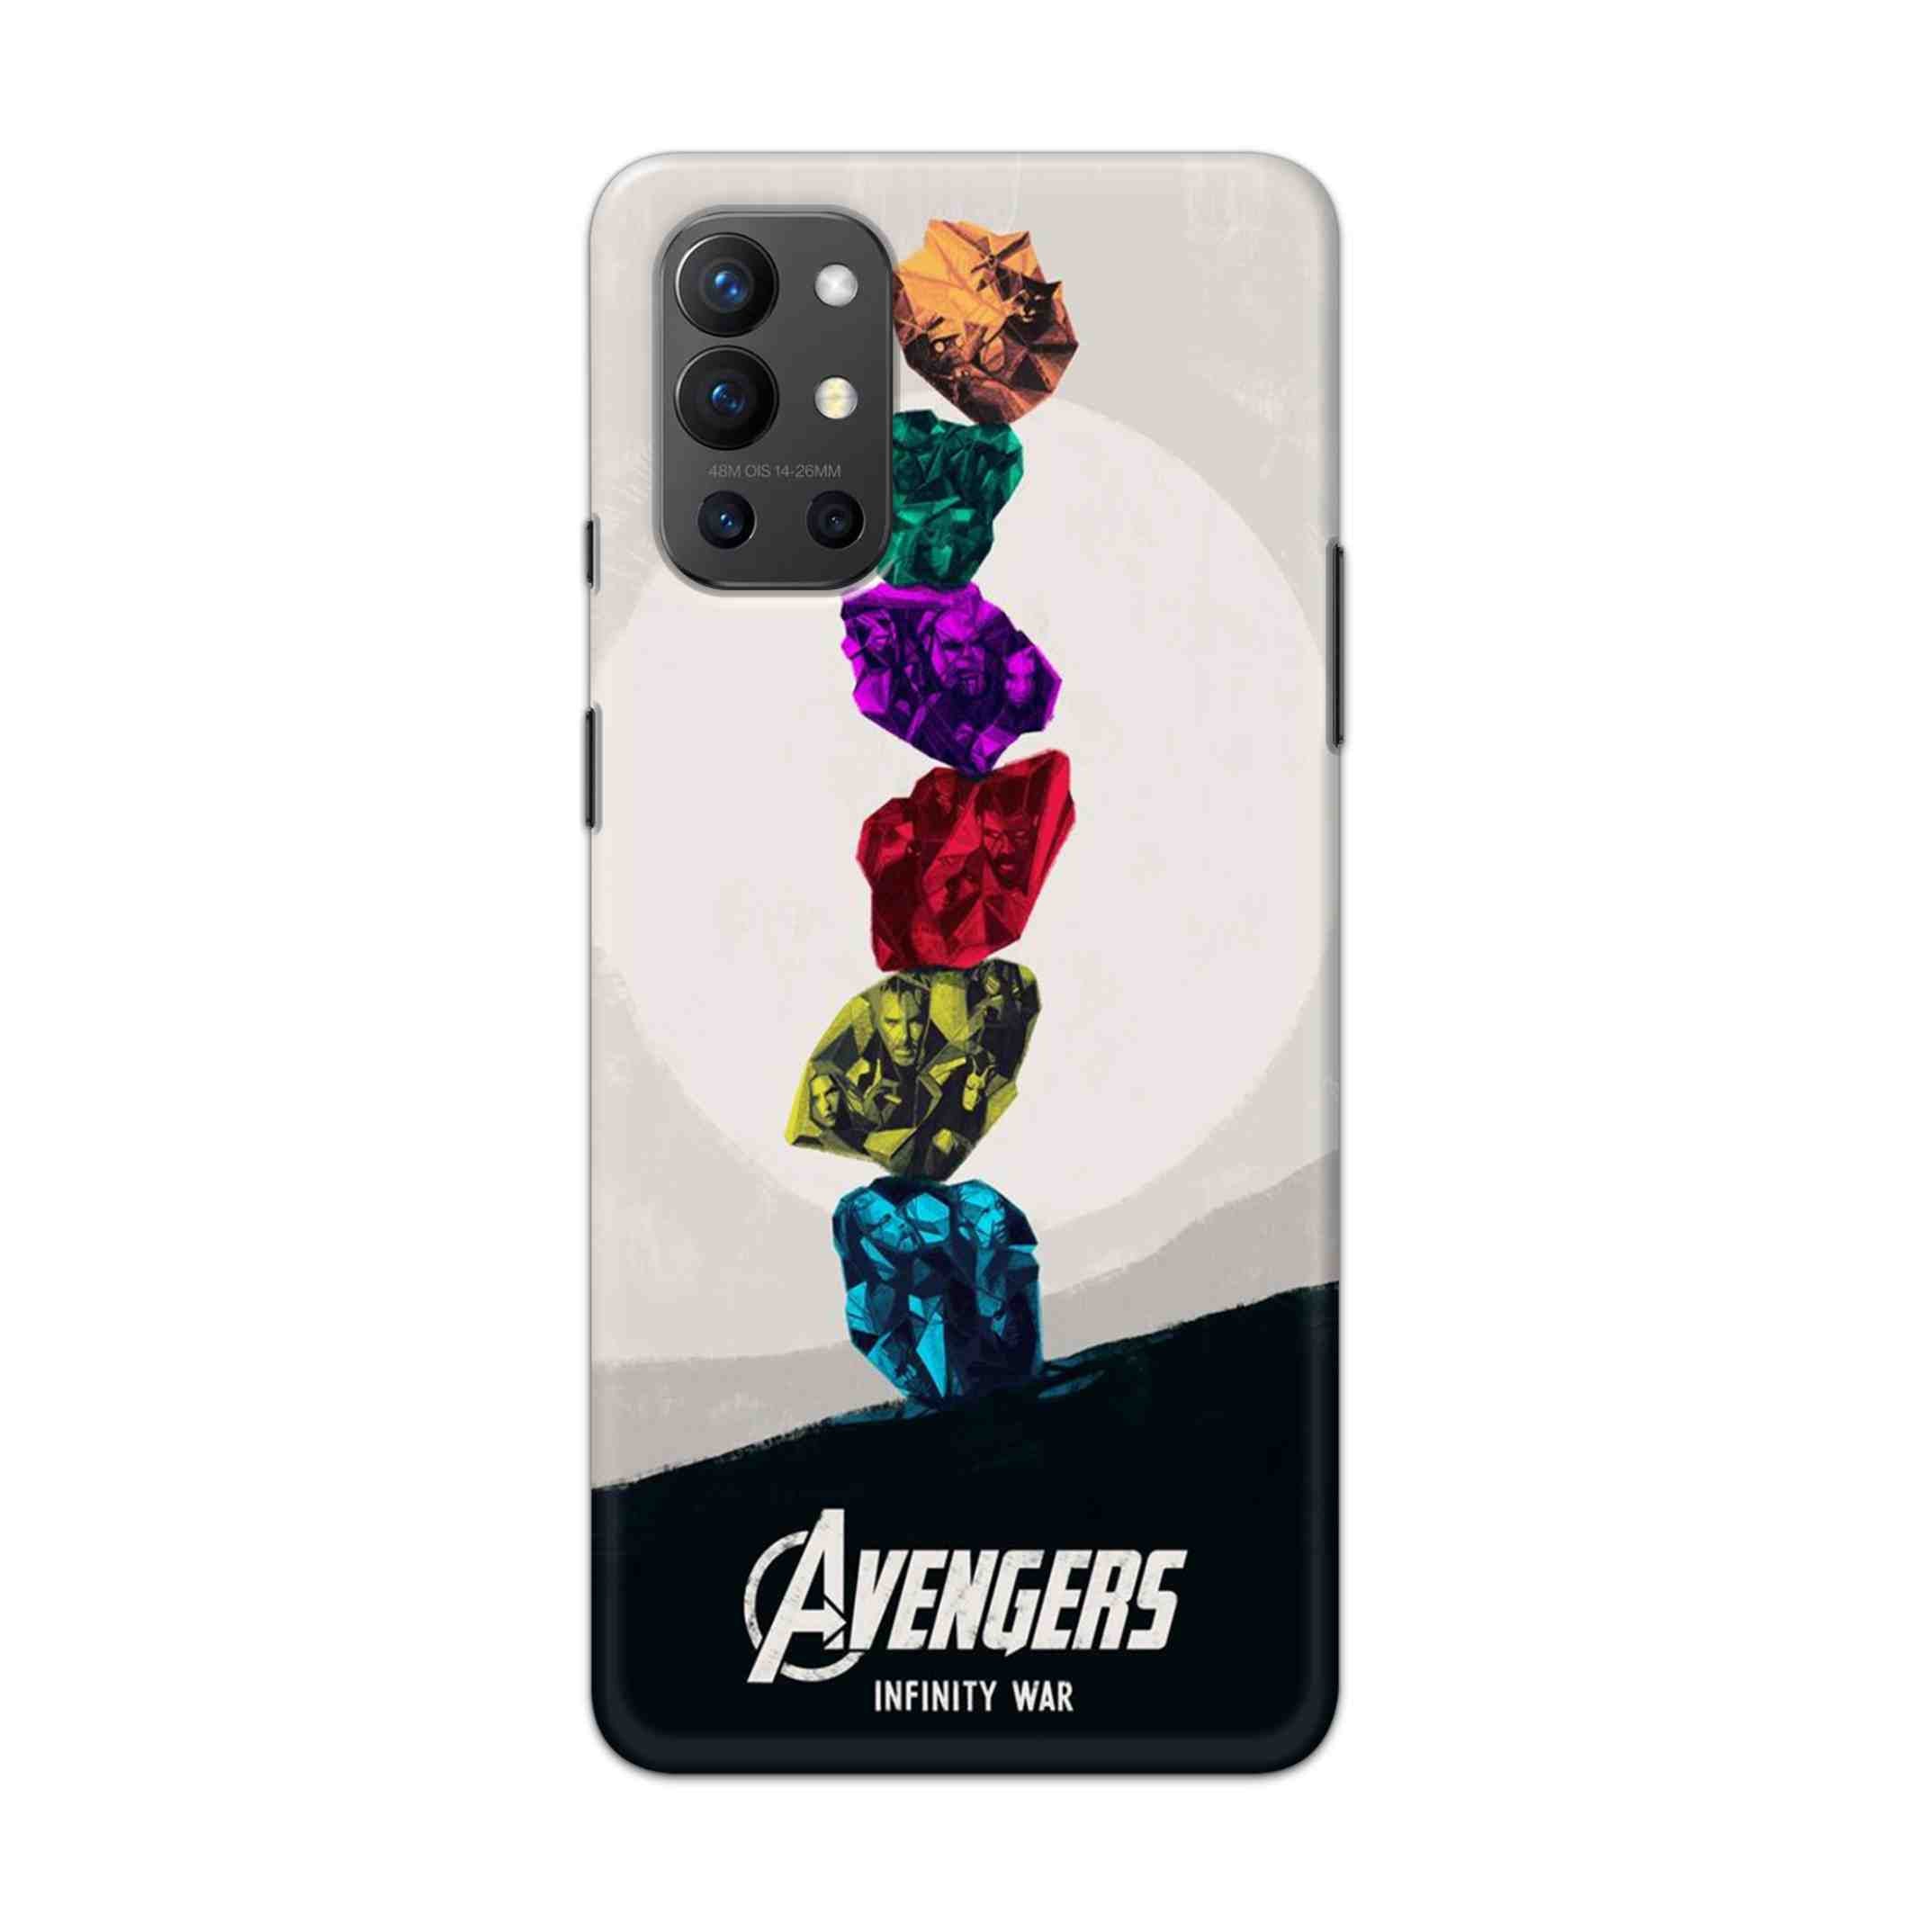 Buy Avengers Stone Hard Back Mobile Phone Case Cover For OnePlus 9R / 8T Online